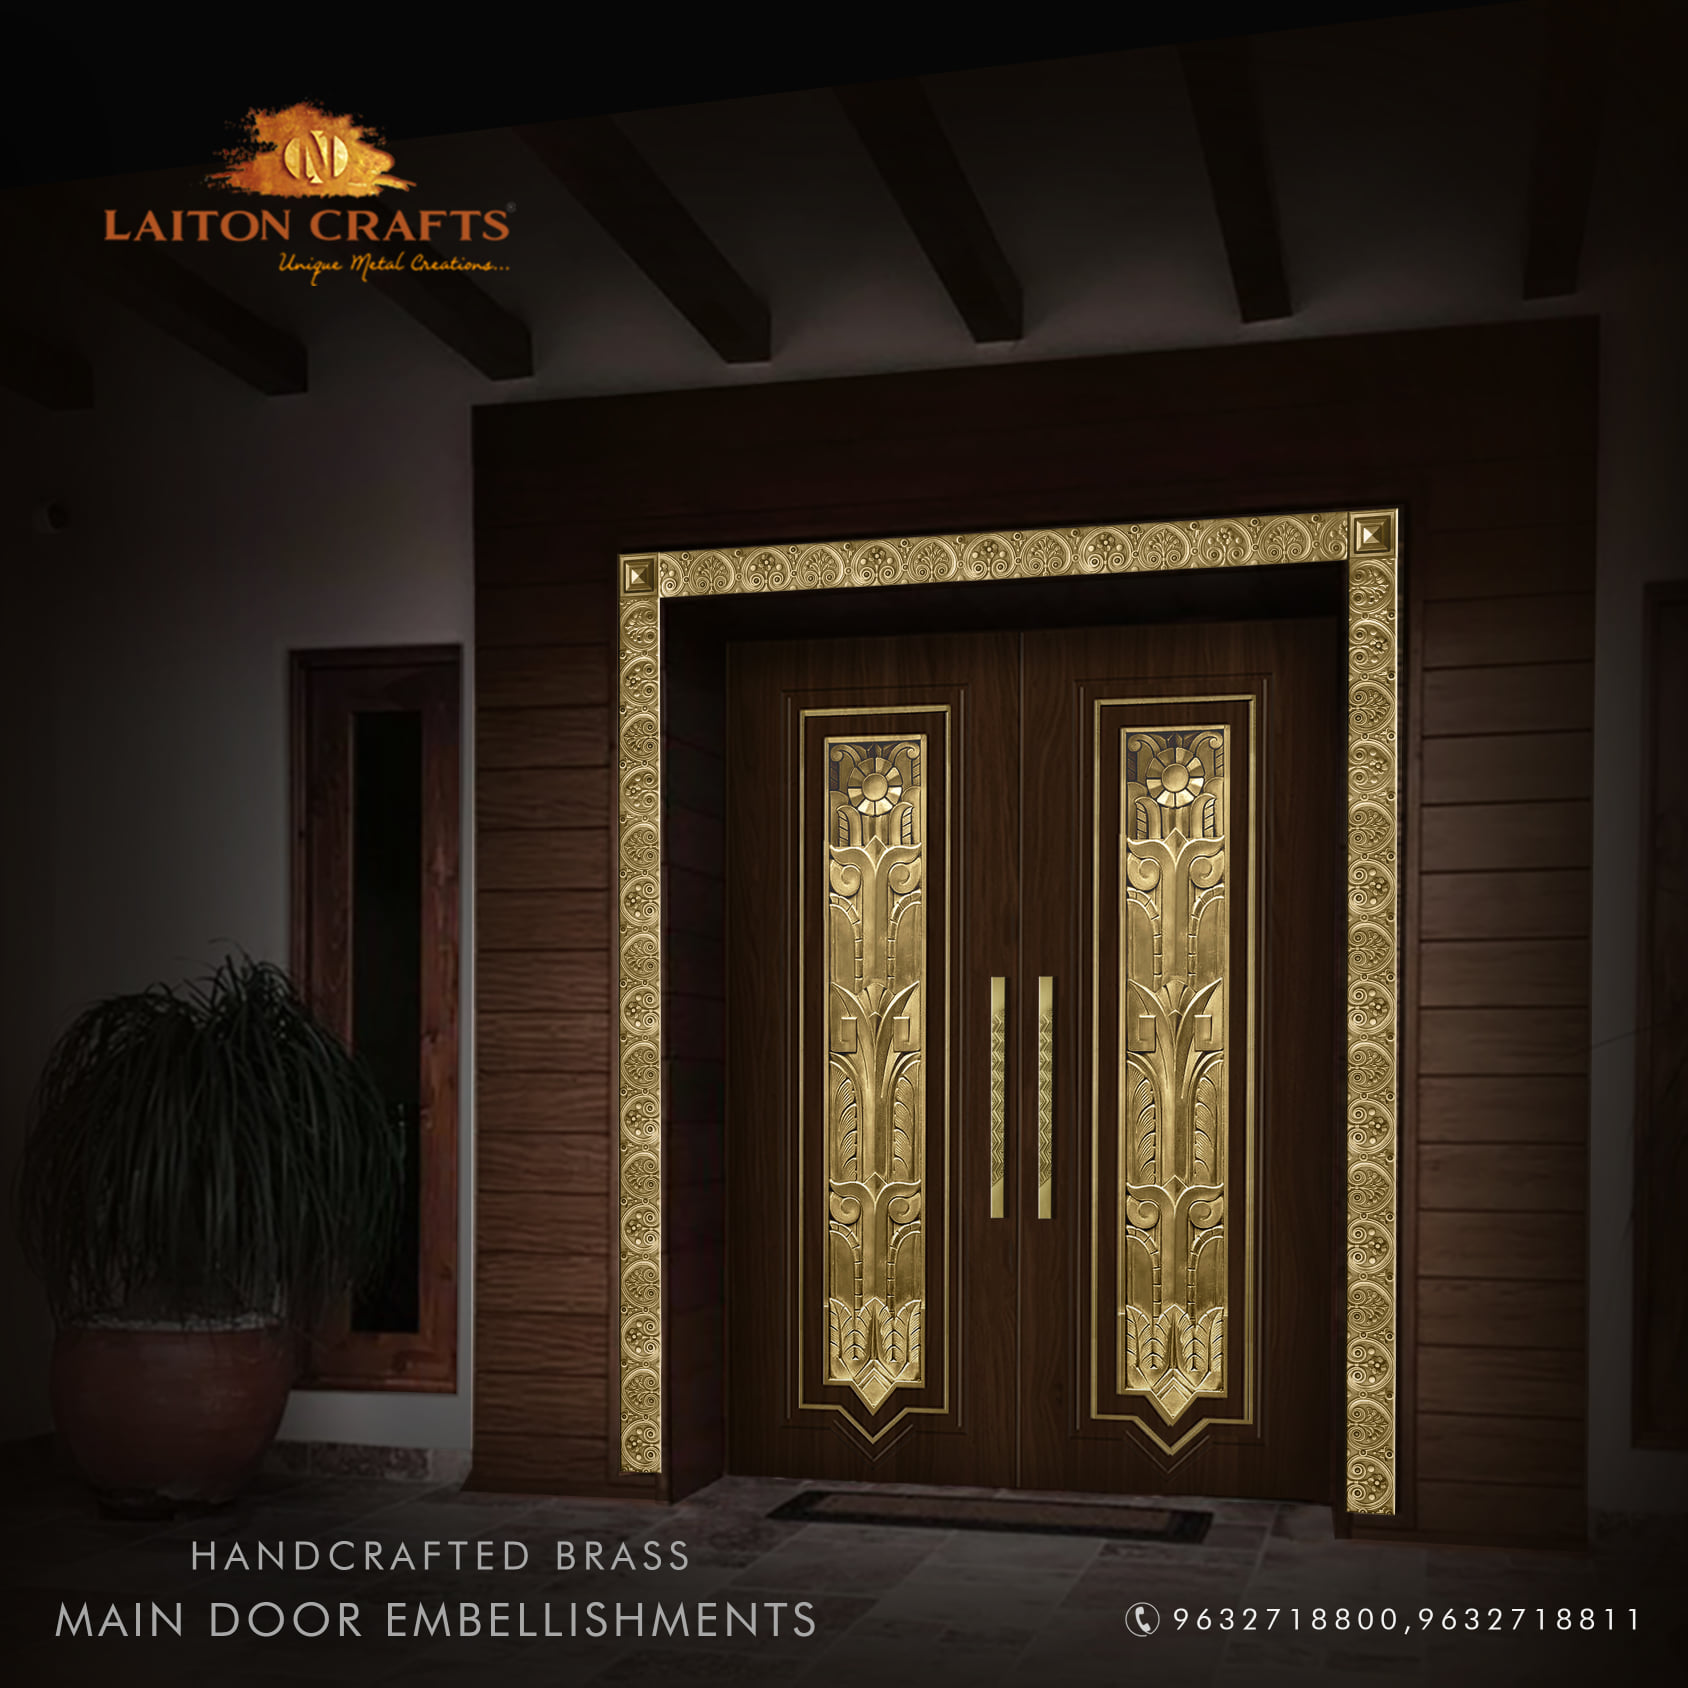  Handcrafted Front Door Embellishments from Laiton Crafts